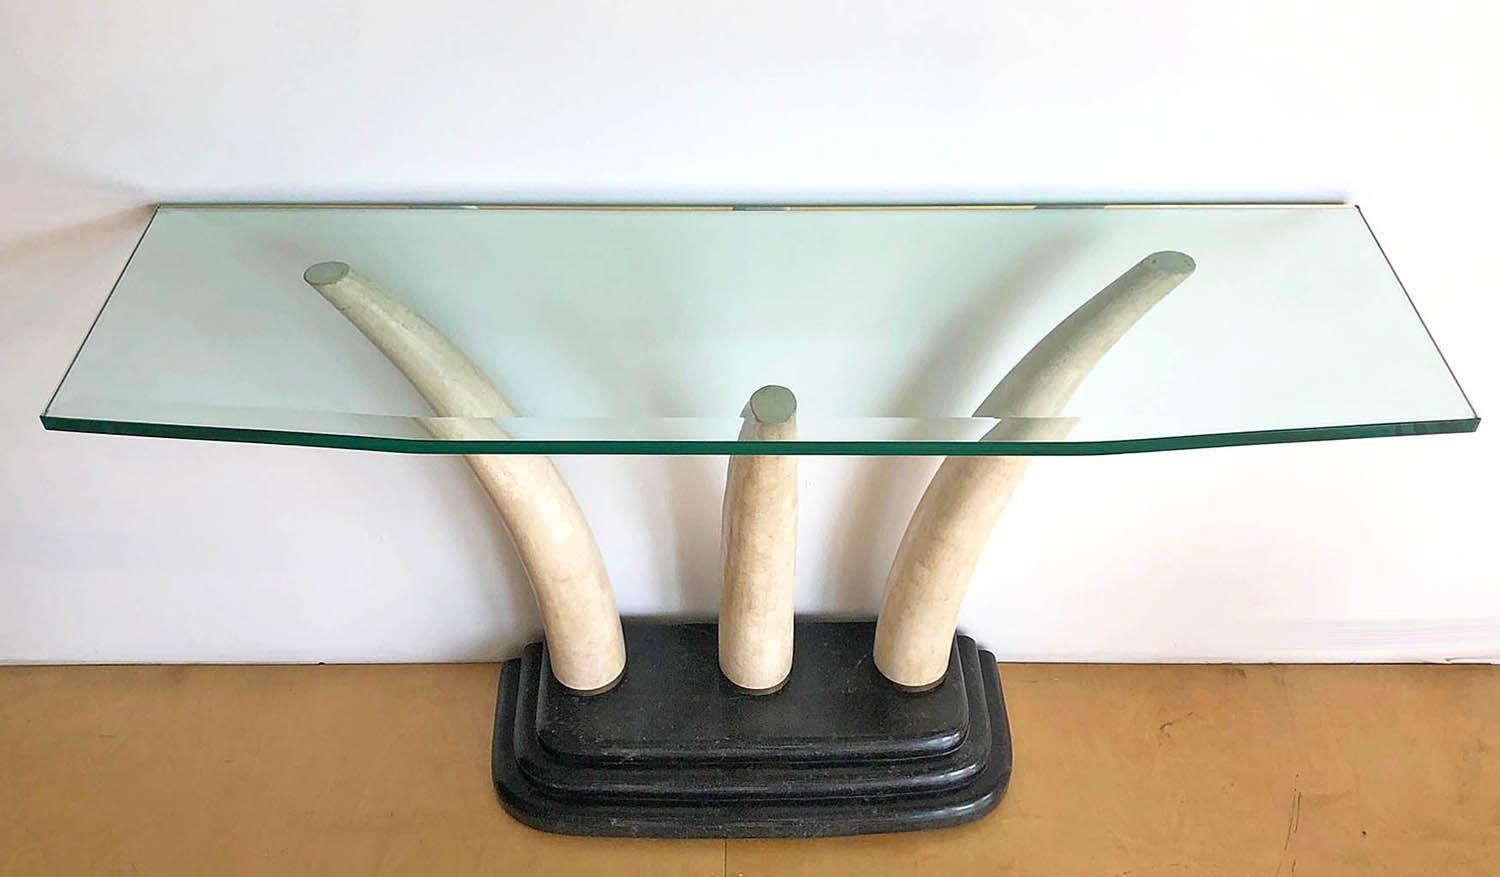 Stone and beveled glass console table by Maitland. Tusks are made from tessellated stone. Not sourced from animals. Finest quality materials and craftsmanship.

Complementary delivery in the Los Angeles / Beverly Hills area. Pick up is also an